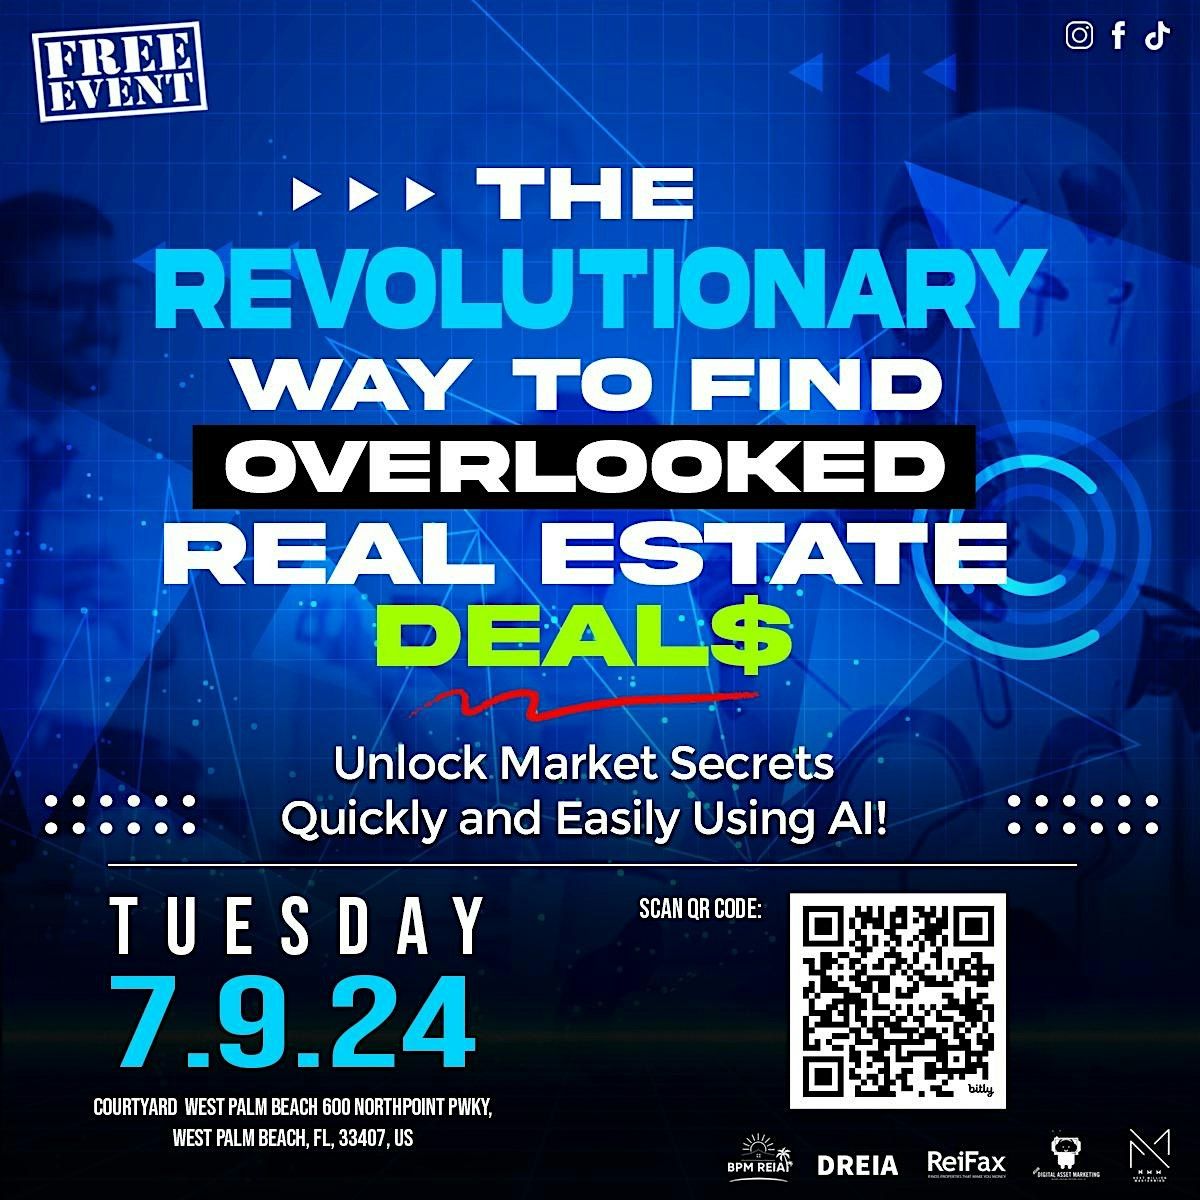 The Revolutionary Way to Find Overlooked Real Estate Deal$